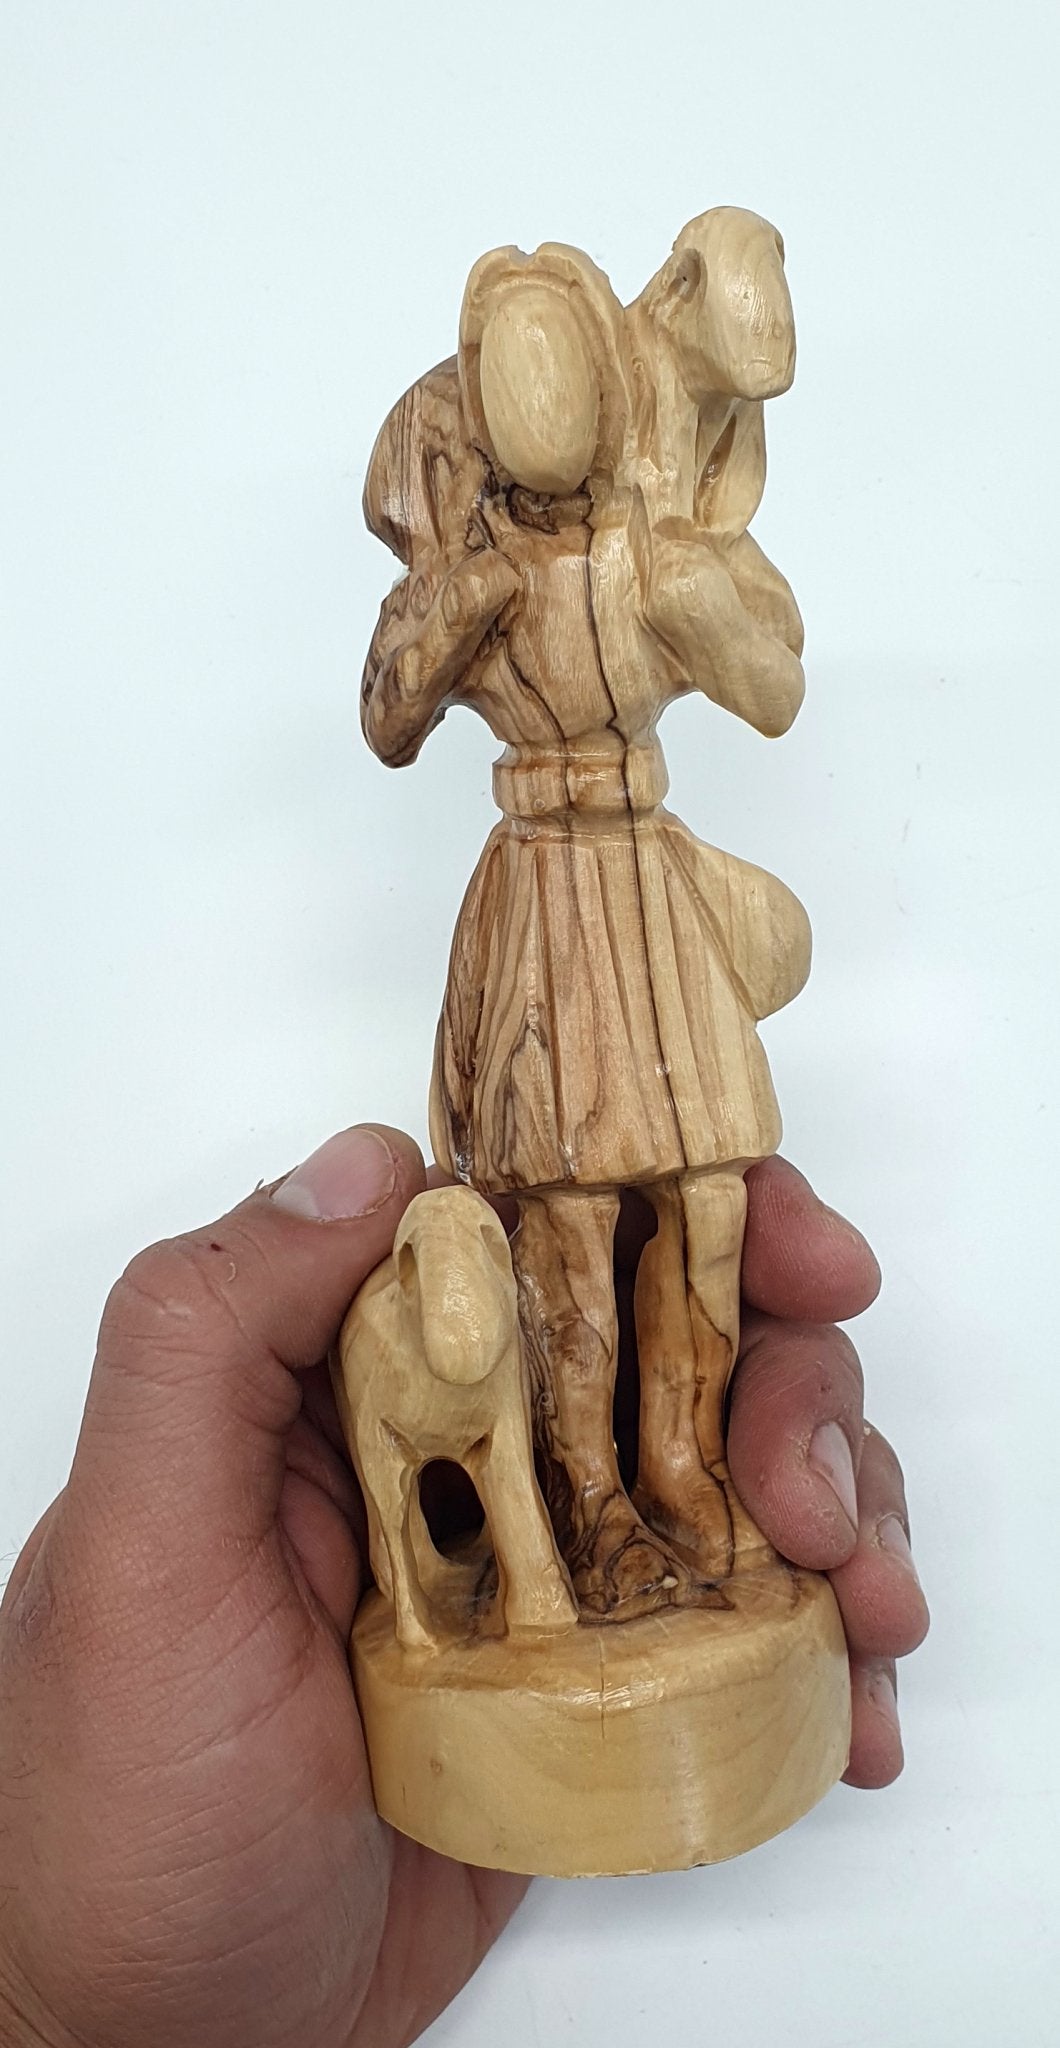 Zuluf Olive Wood Shepherd Carrying Lamb Statue - Handmade Religious Sculpture for Home Decor - Bethlehem Crafted 6.5-inch Art Piece - Zuluf